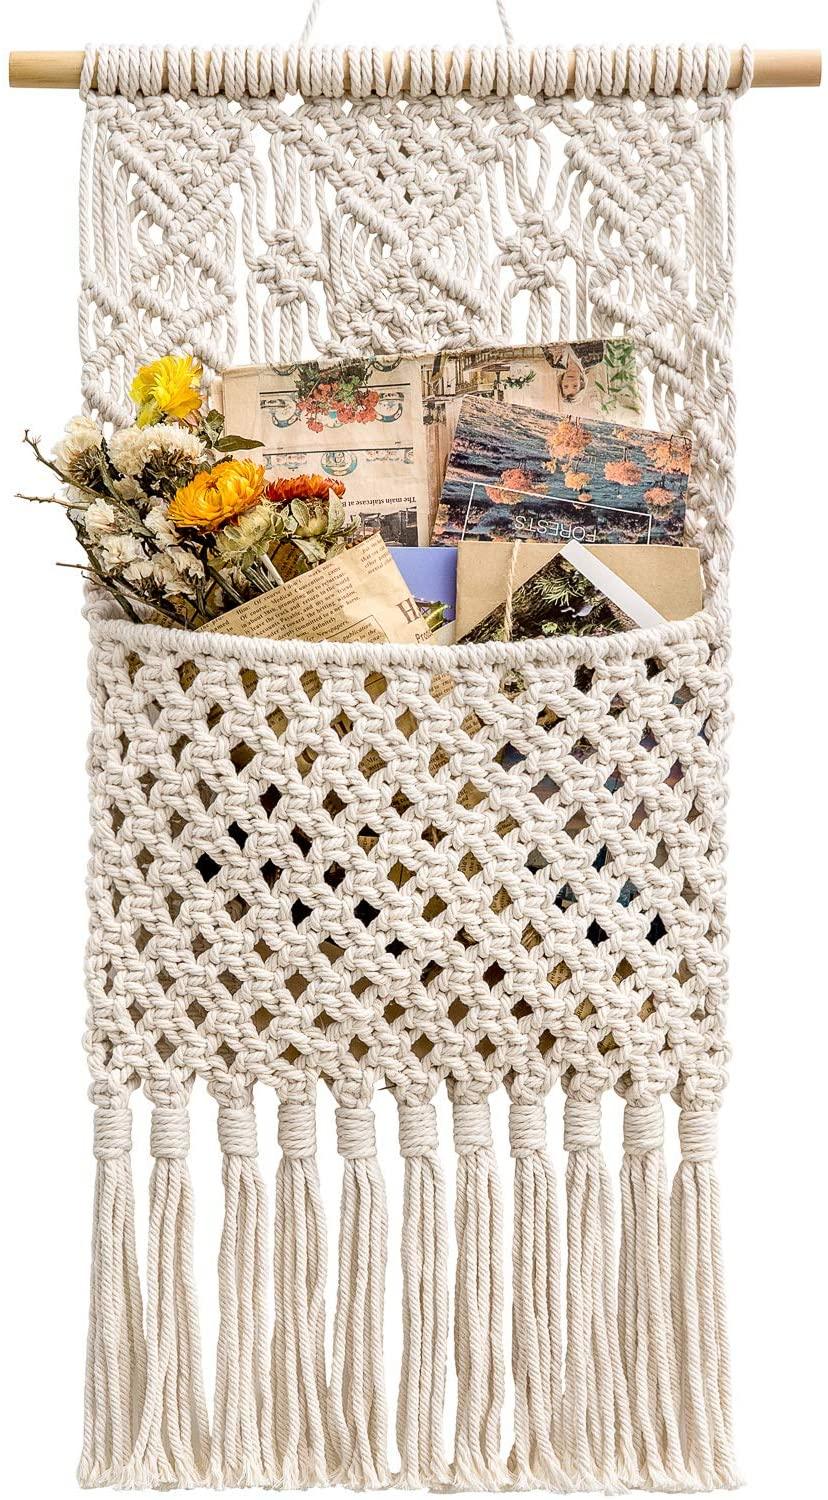 Macrame Wall Holder Small Mail Letters Storage Organizer Holder - Decotree.co Online Shop